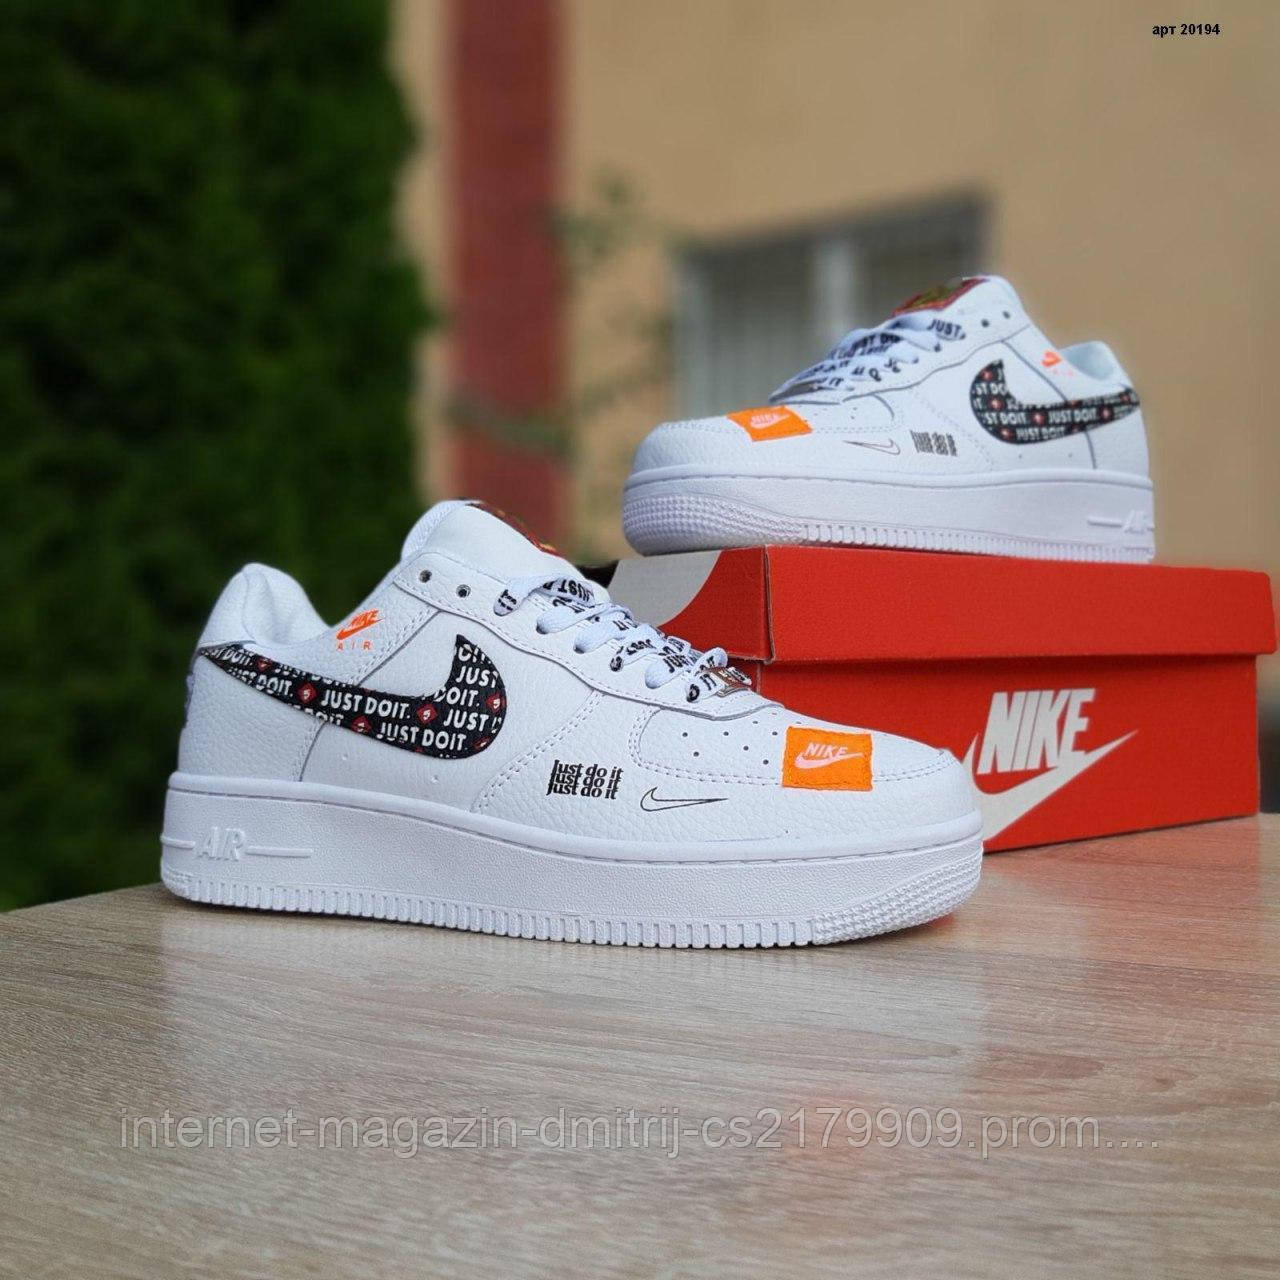 air force 1 off white just do it